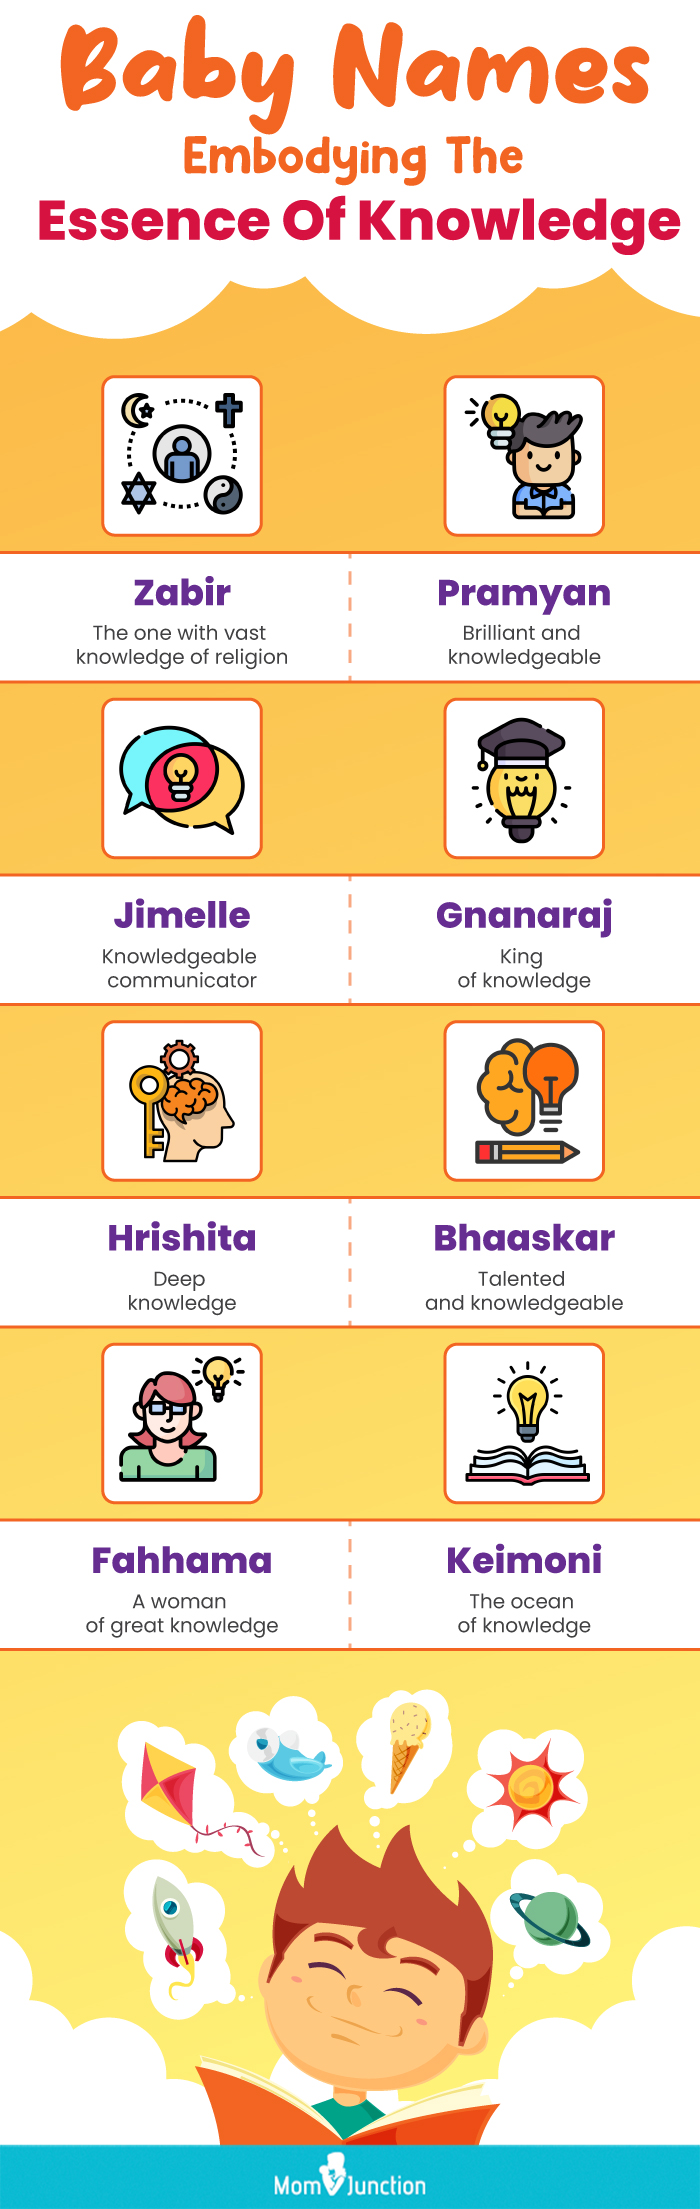 baby names embodying the essence of knowledge (infographic)